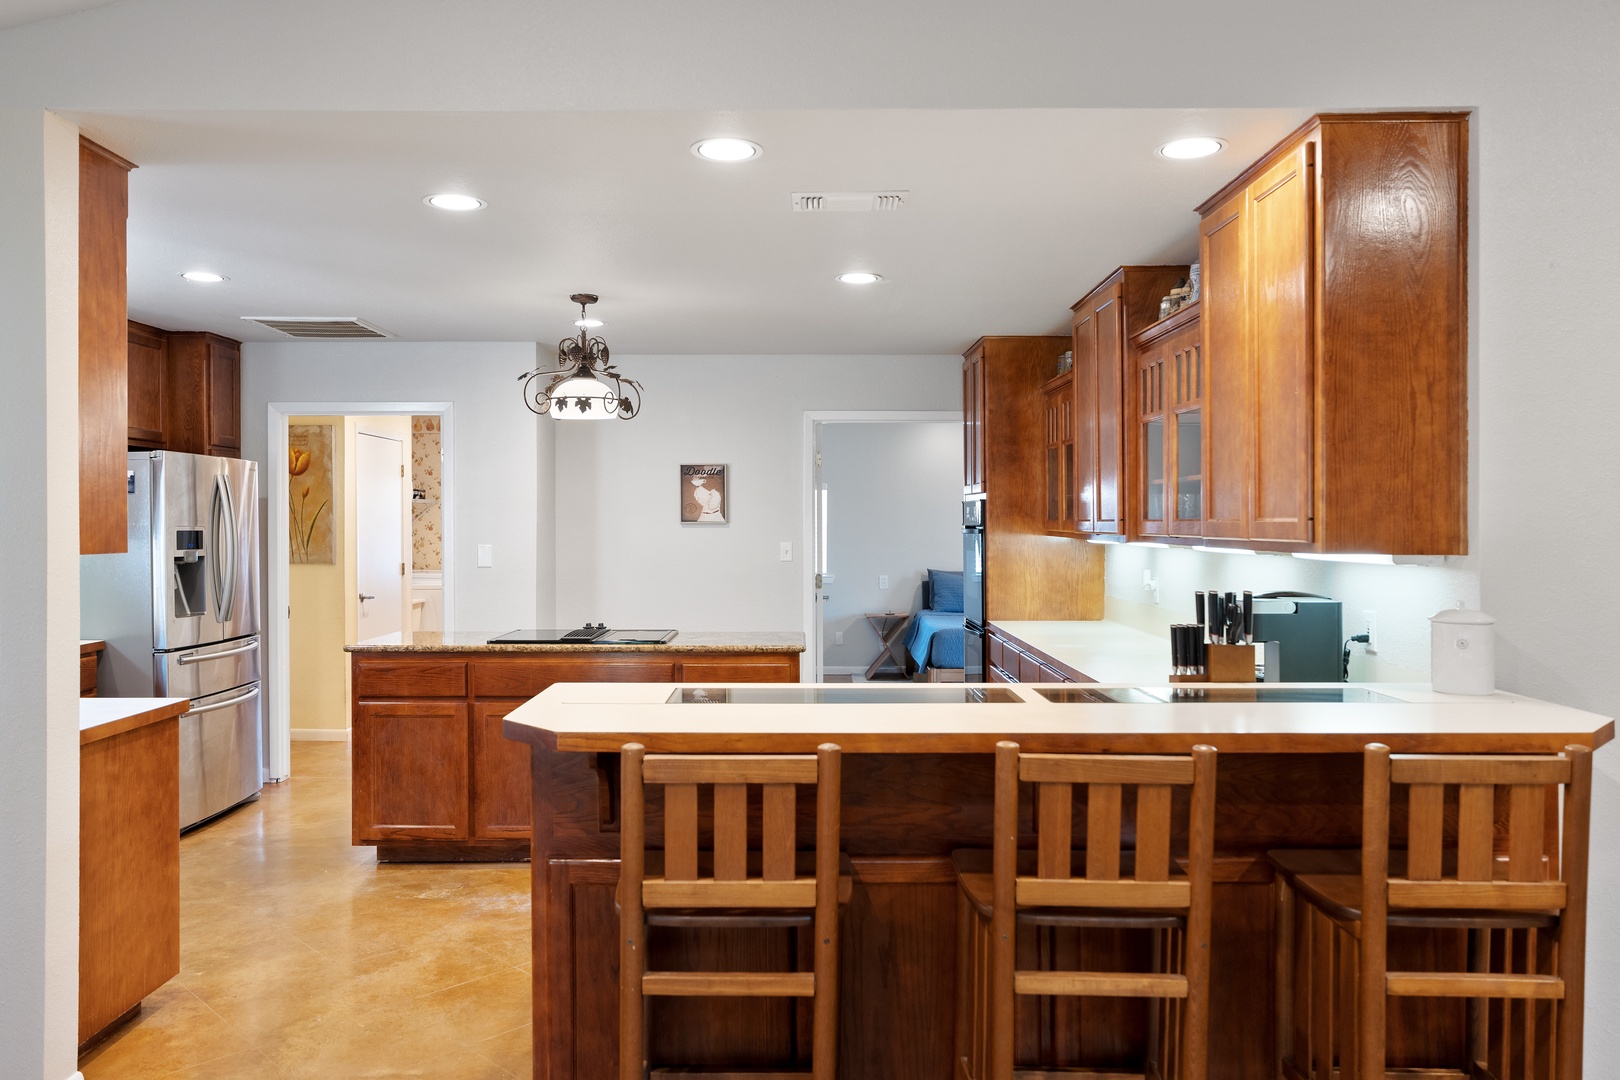 The kitchen is spacious and open, offering counter seating for 3